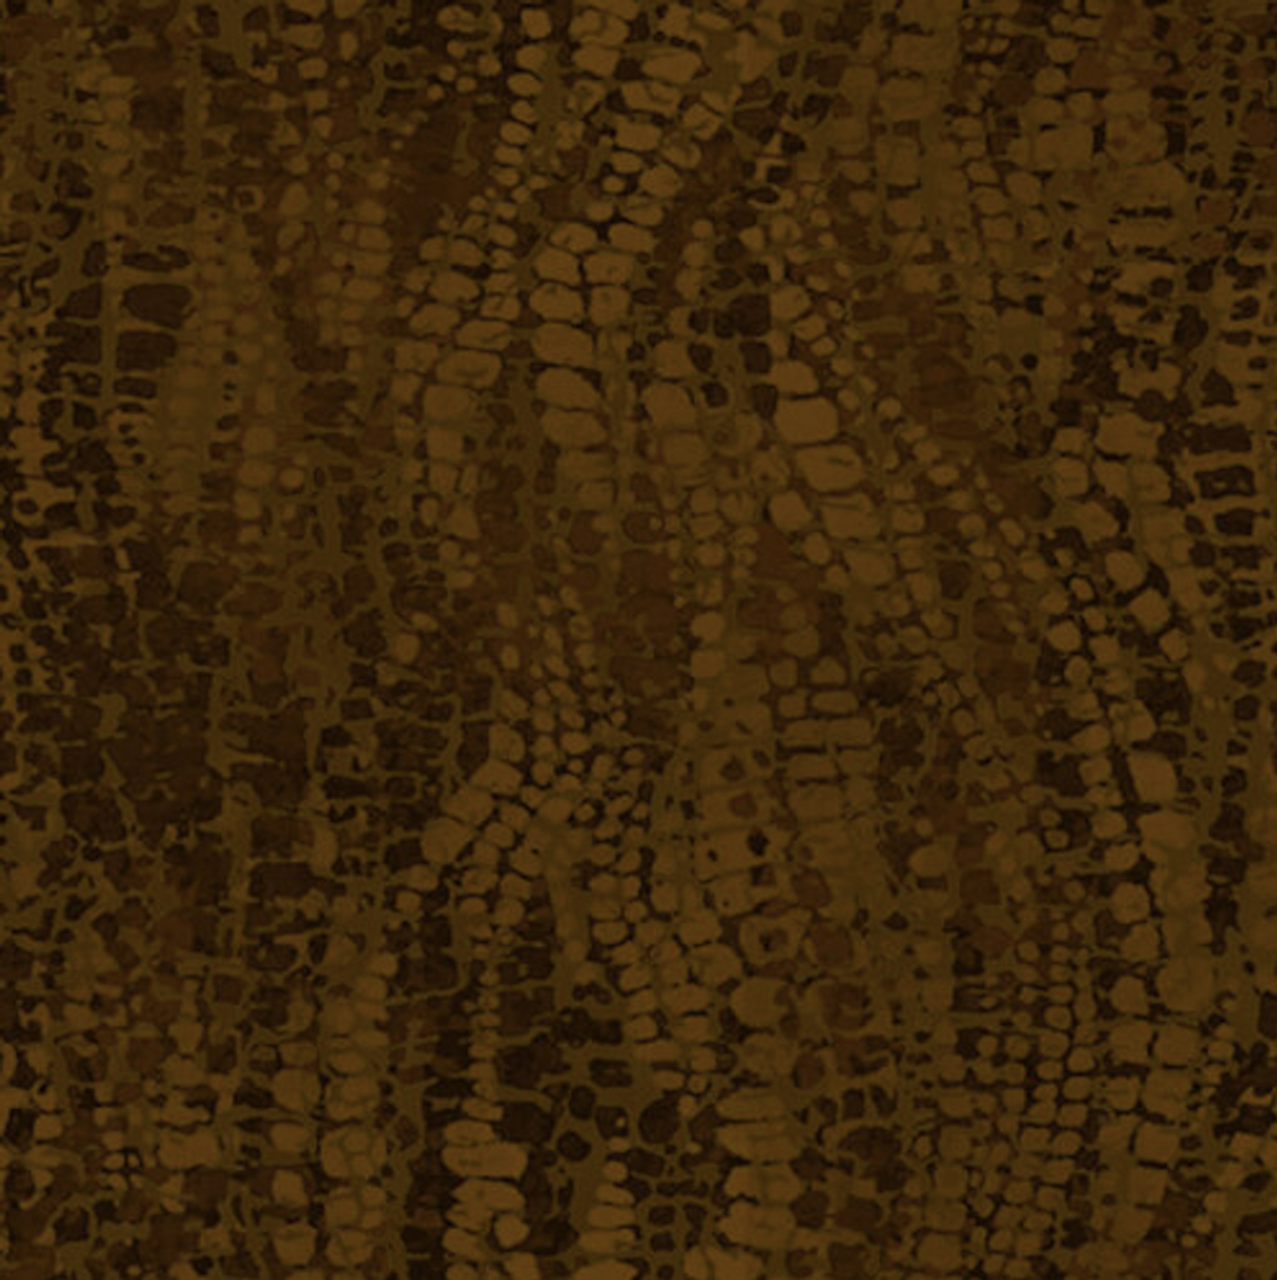 Blank Quilting Chameleon Blender Brown Cotton Fabric By The Yard